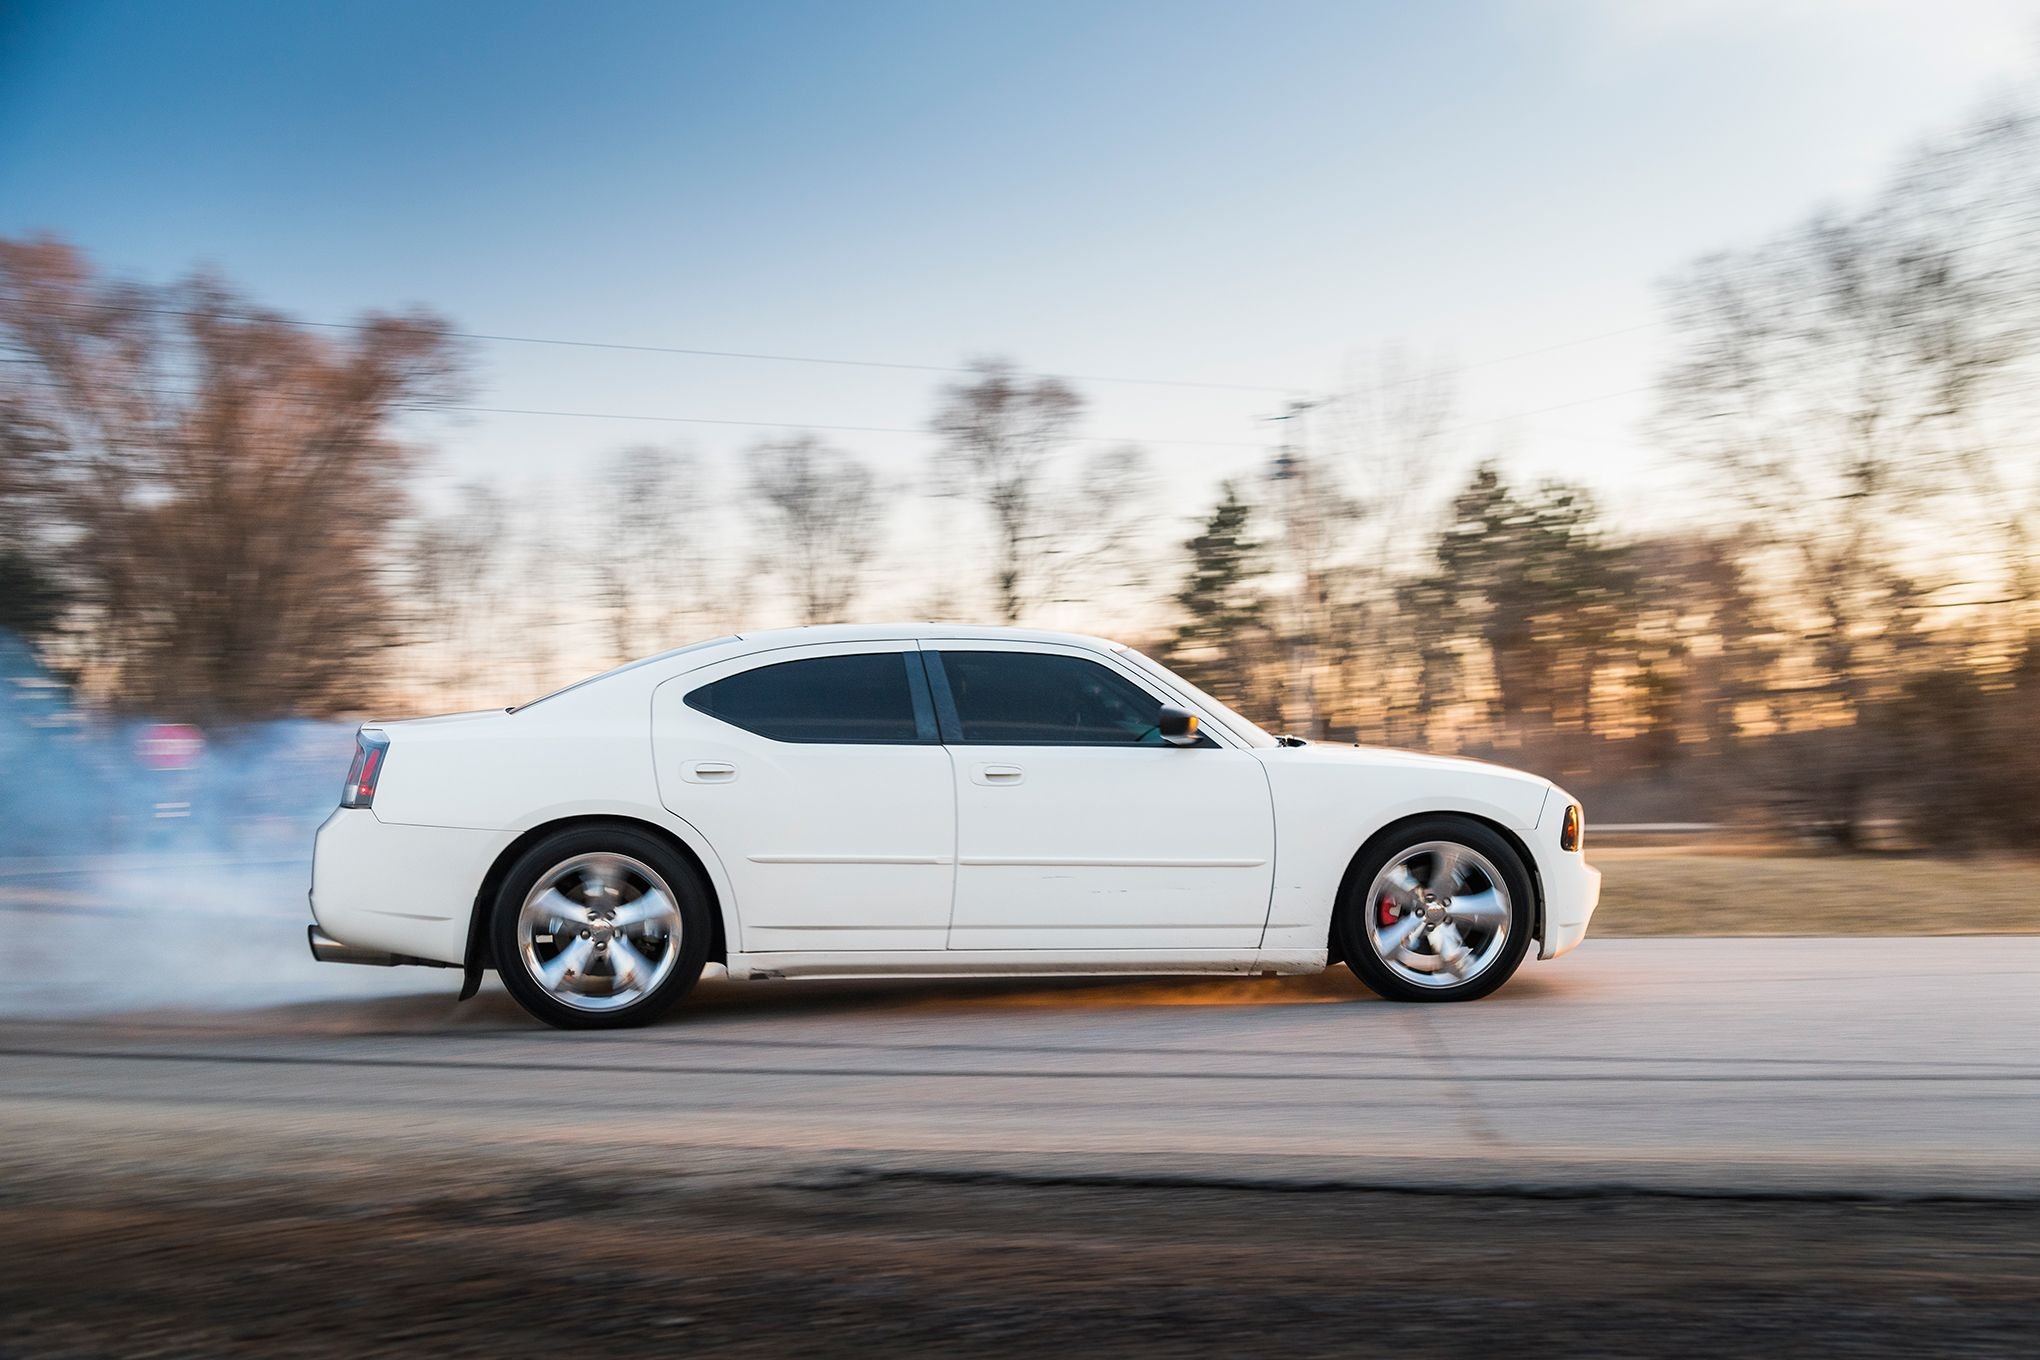 2006, Dodge, Charger, Charger, Cruise, Super, Street, Usa,  04 Wallpaper